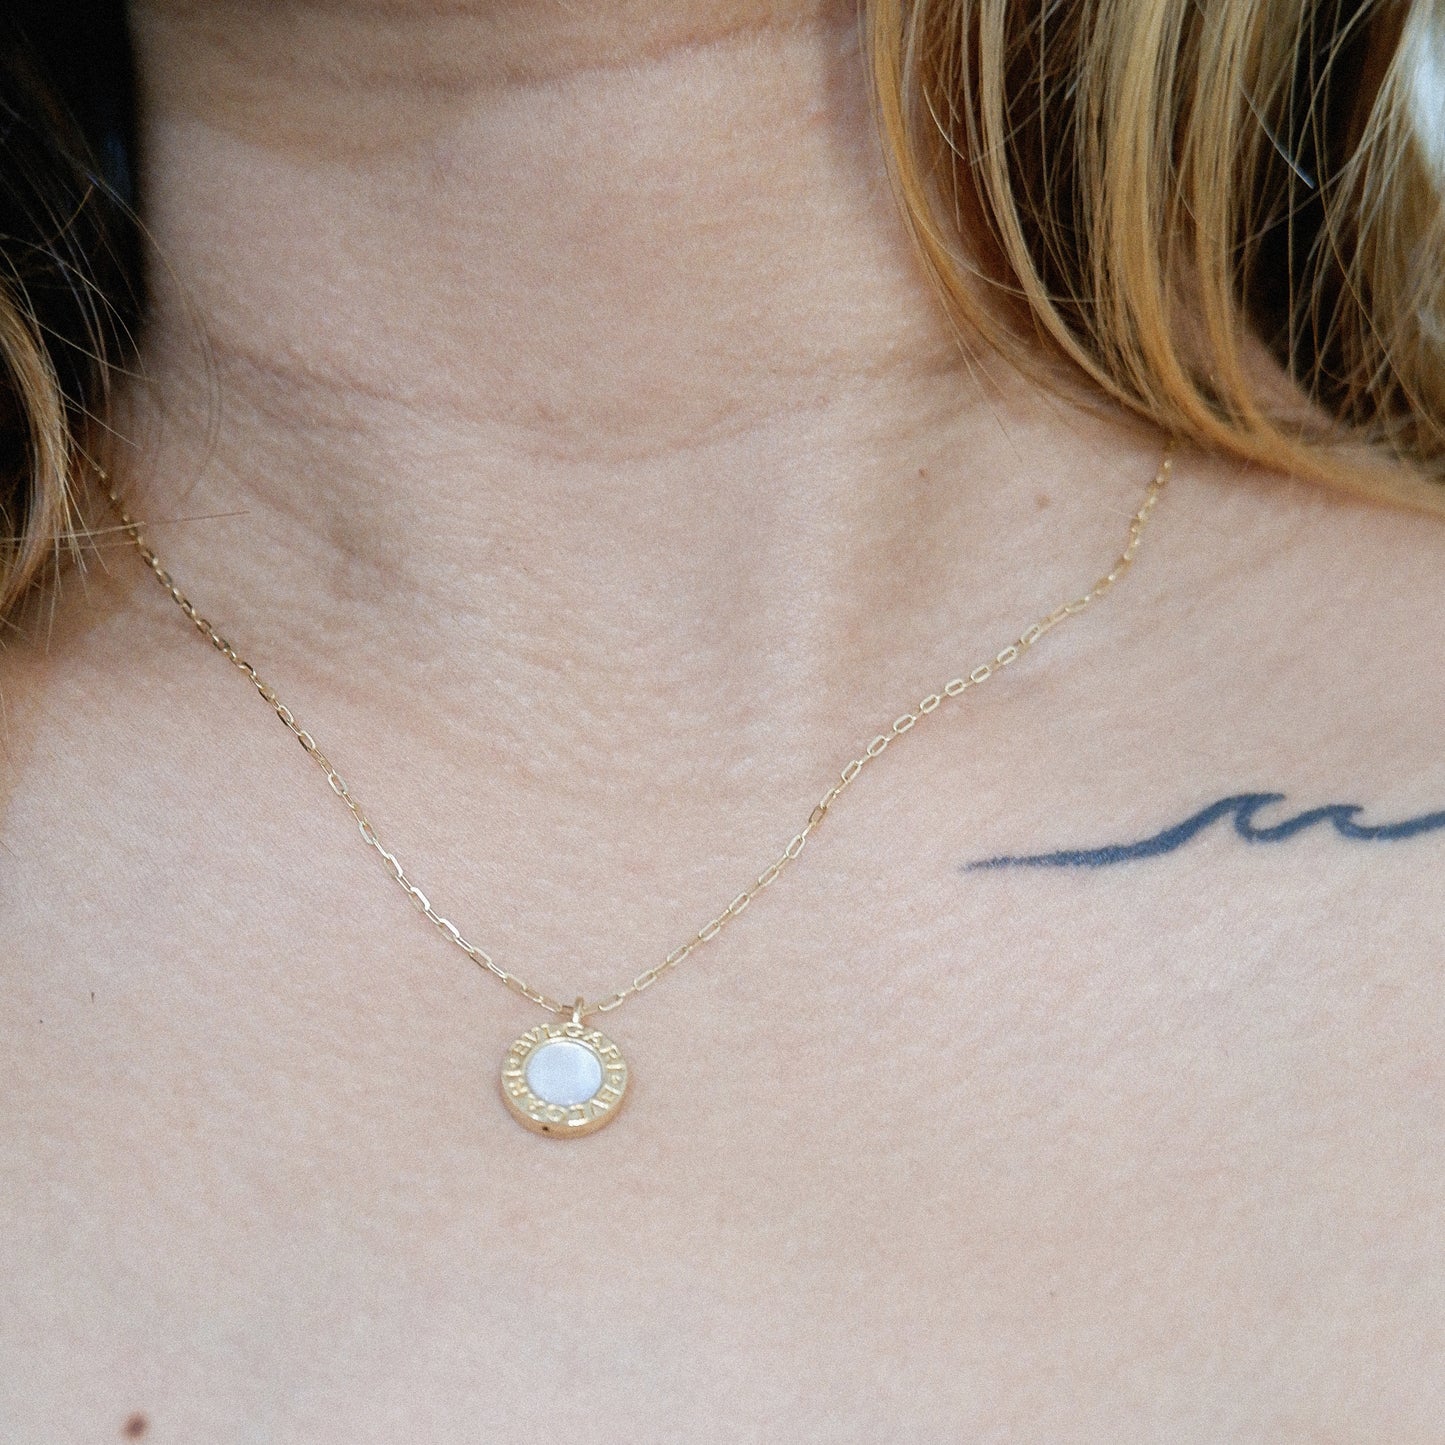 The Dainty Designer Centered Necklace in Solid Gold